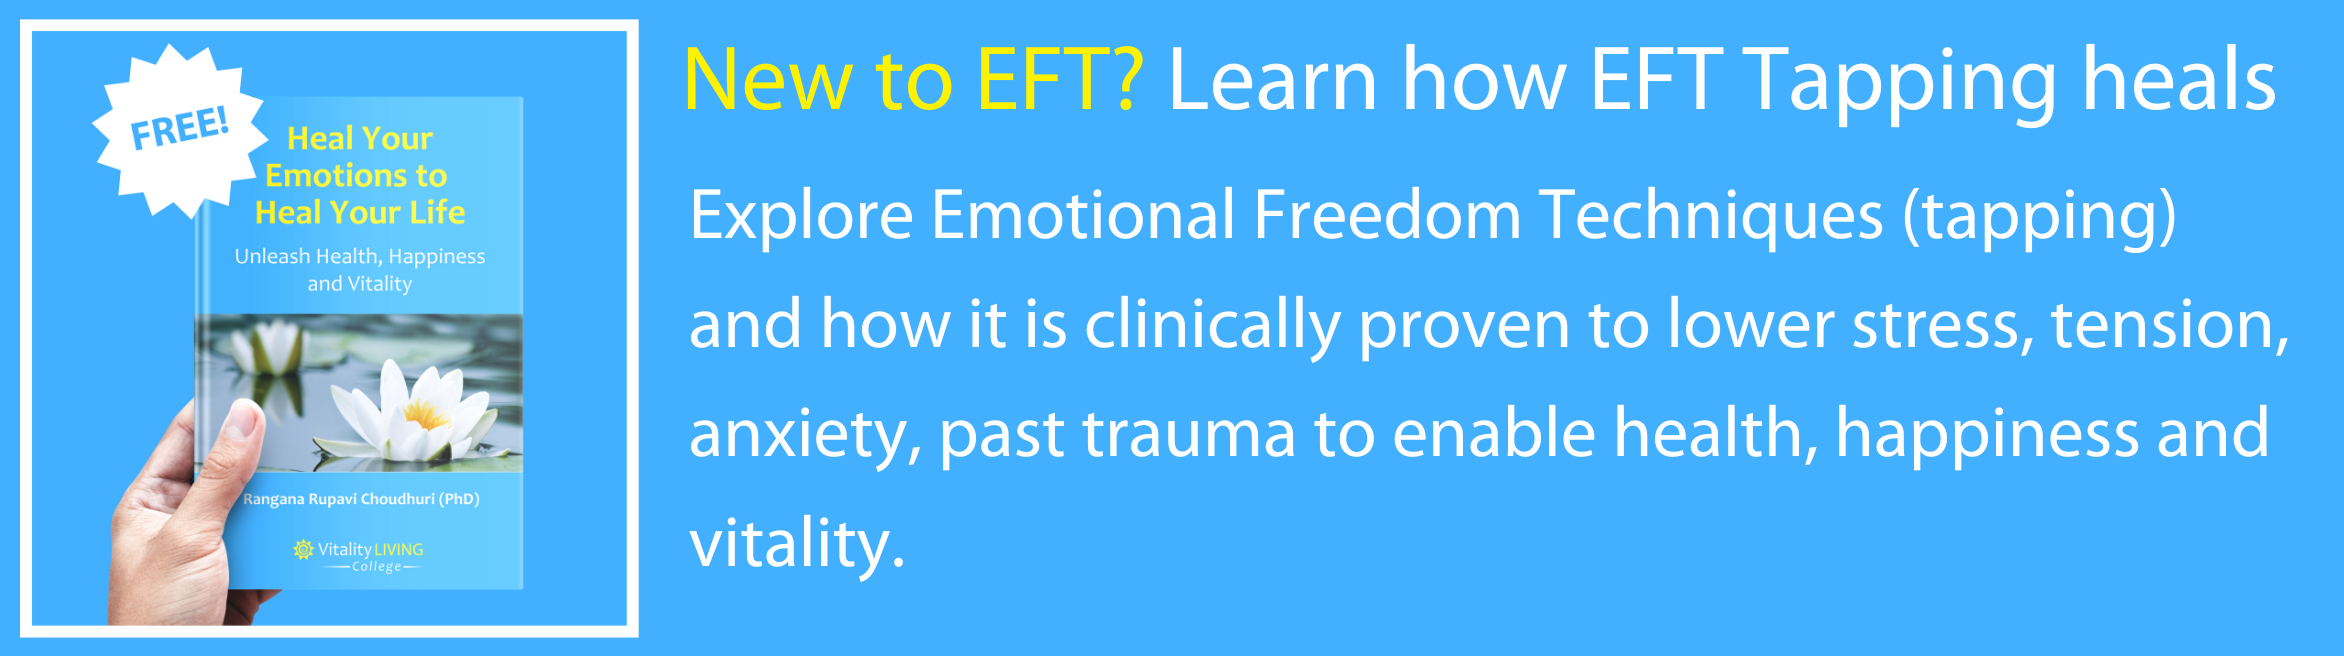 EFT Tapping to gain freedom